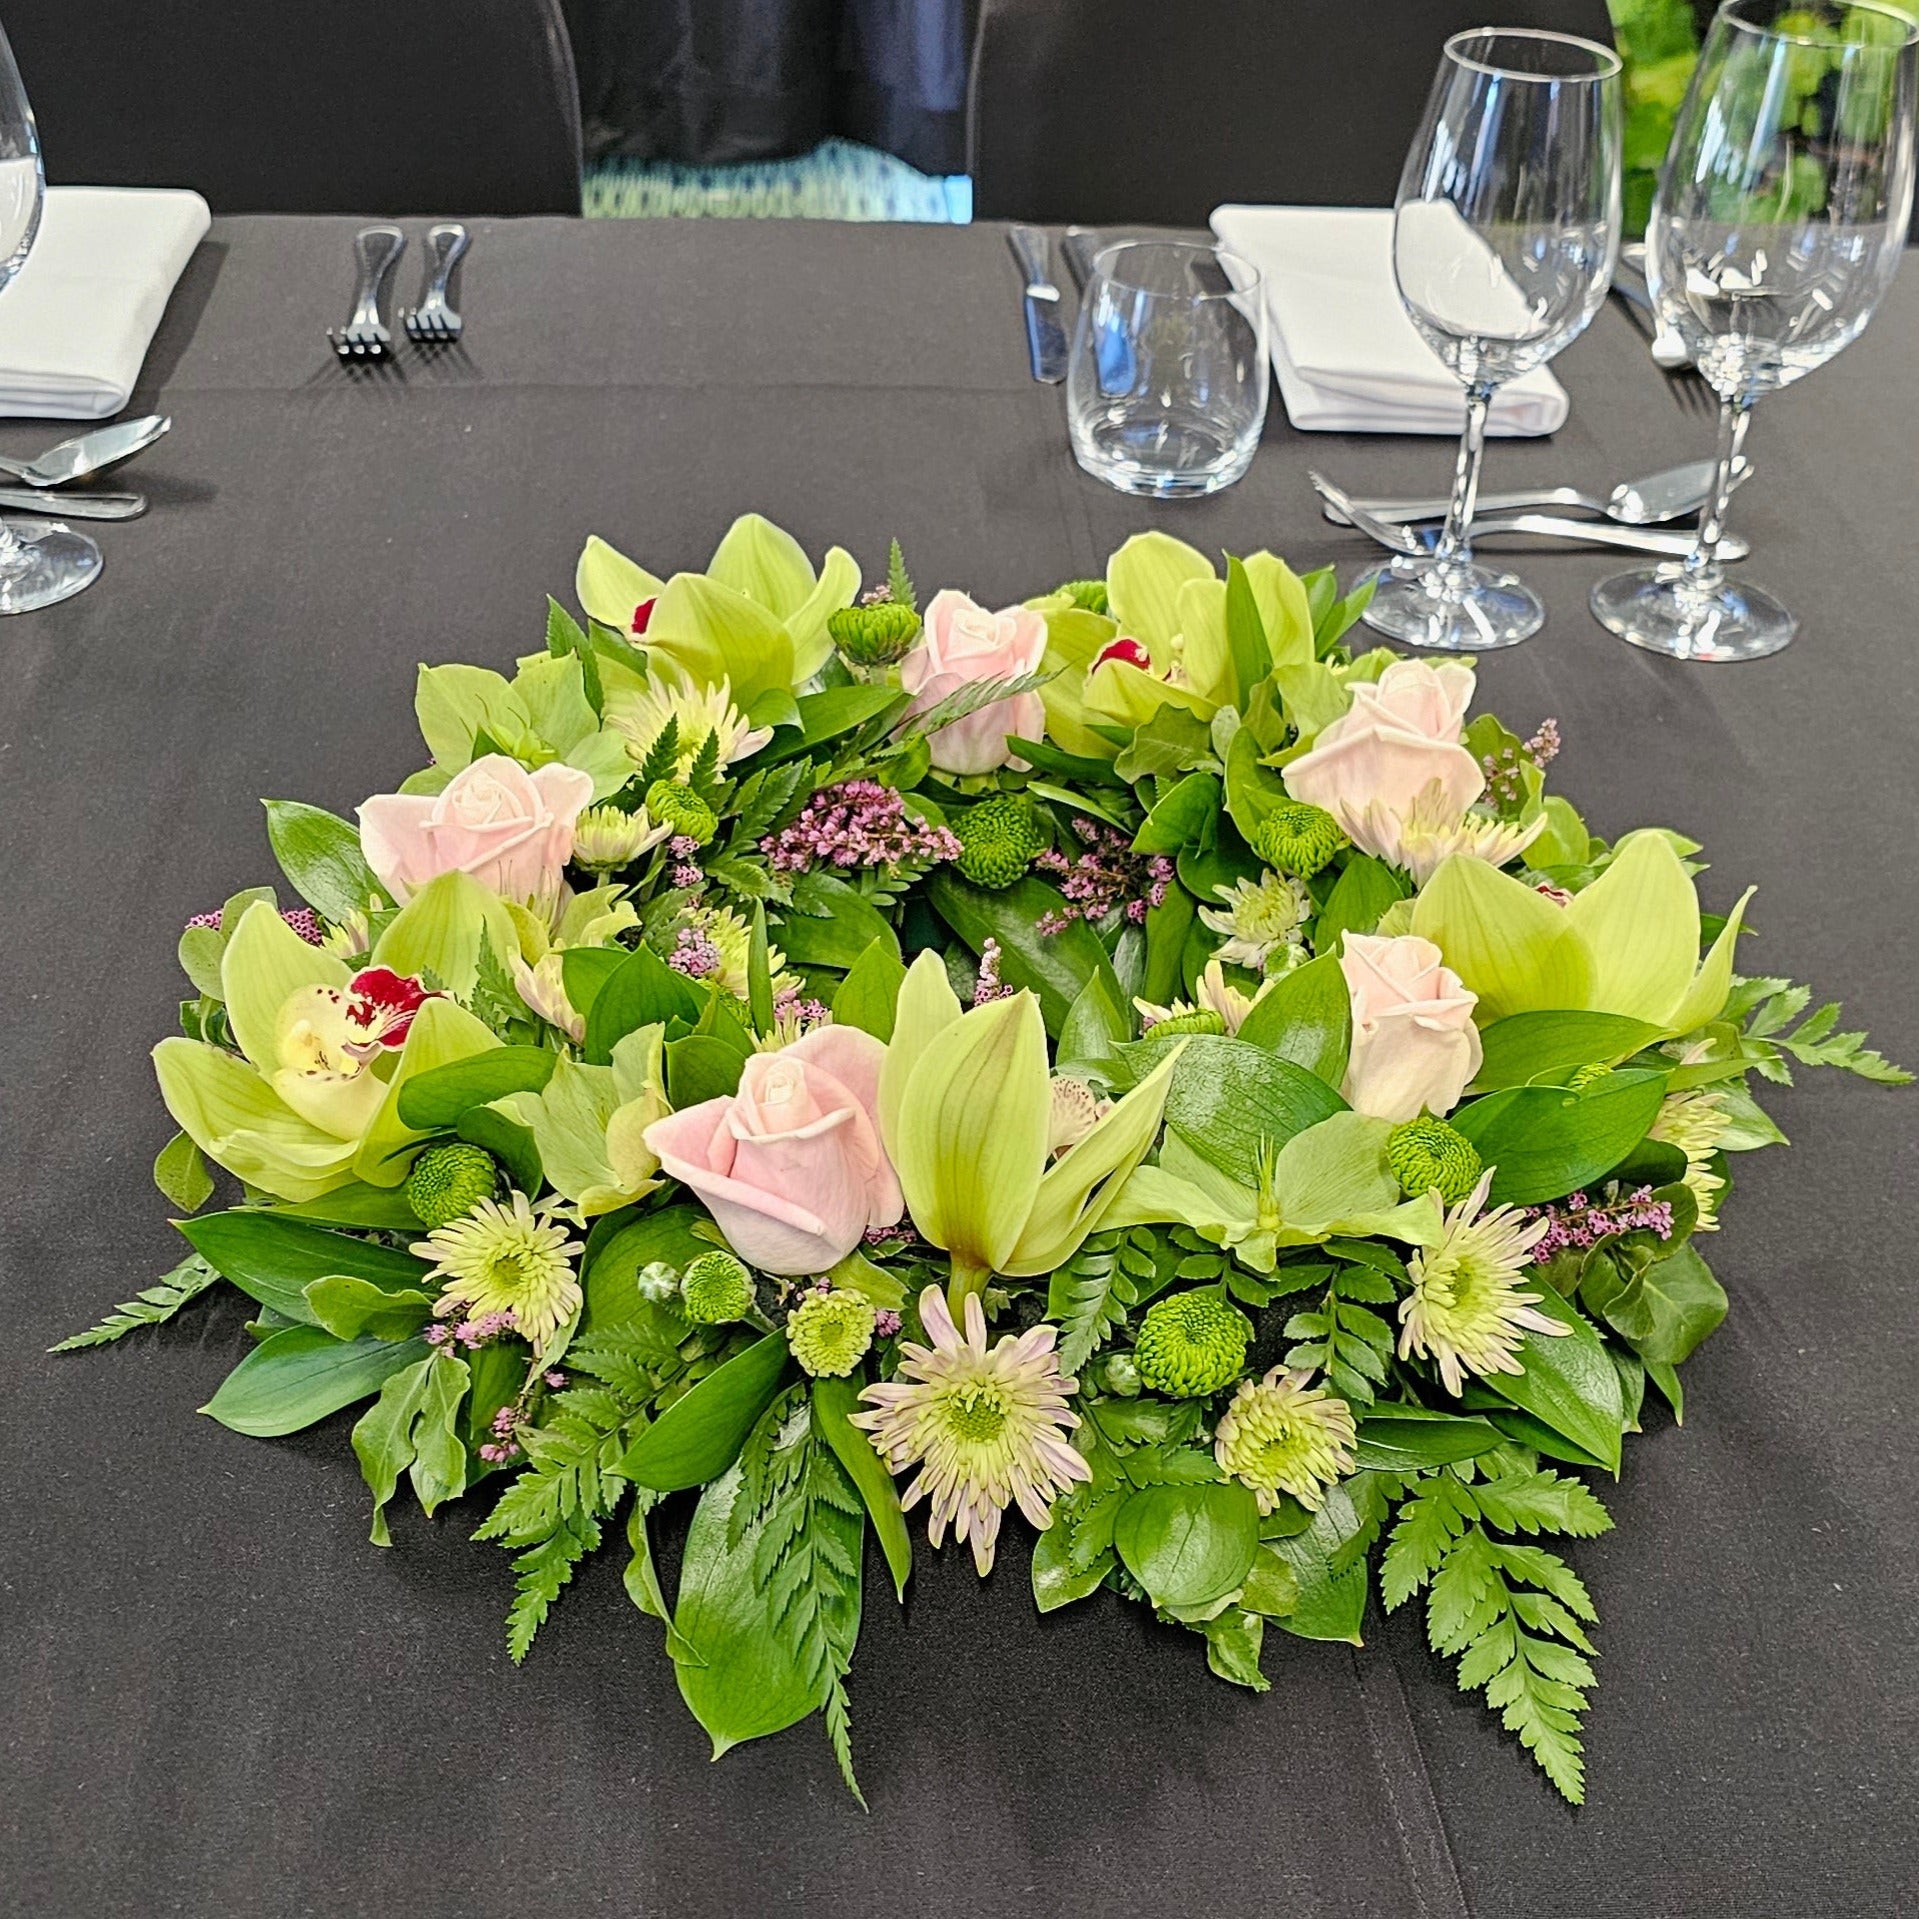 Table dcortion of wreath made from pink roses, greenorchids, green and pink chrysanthemums